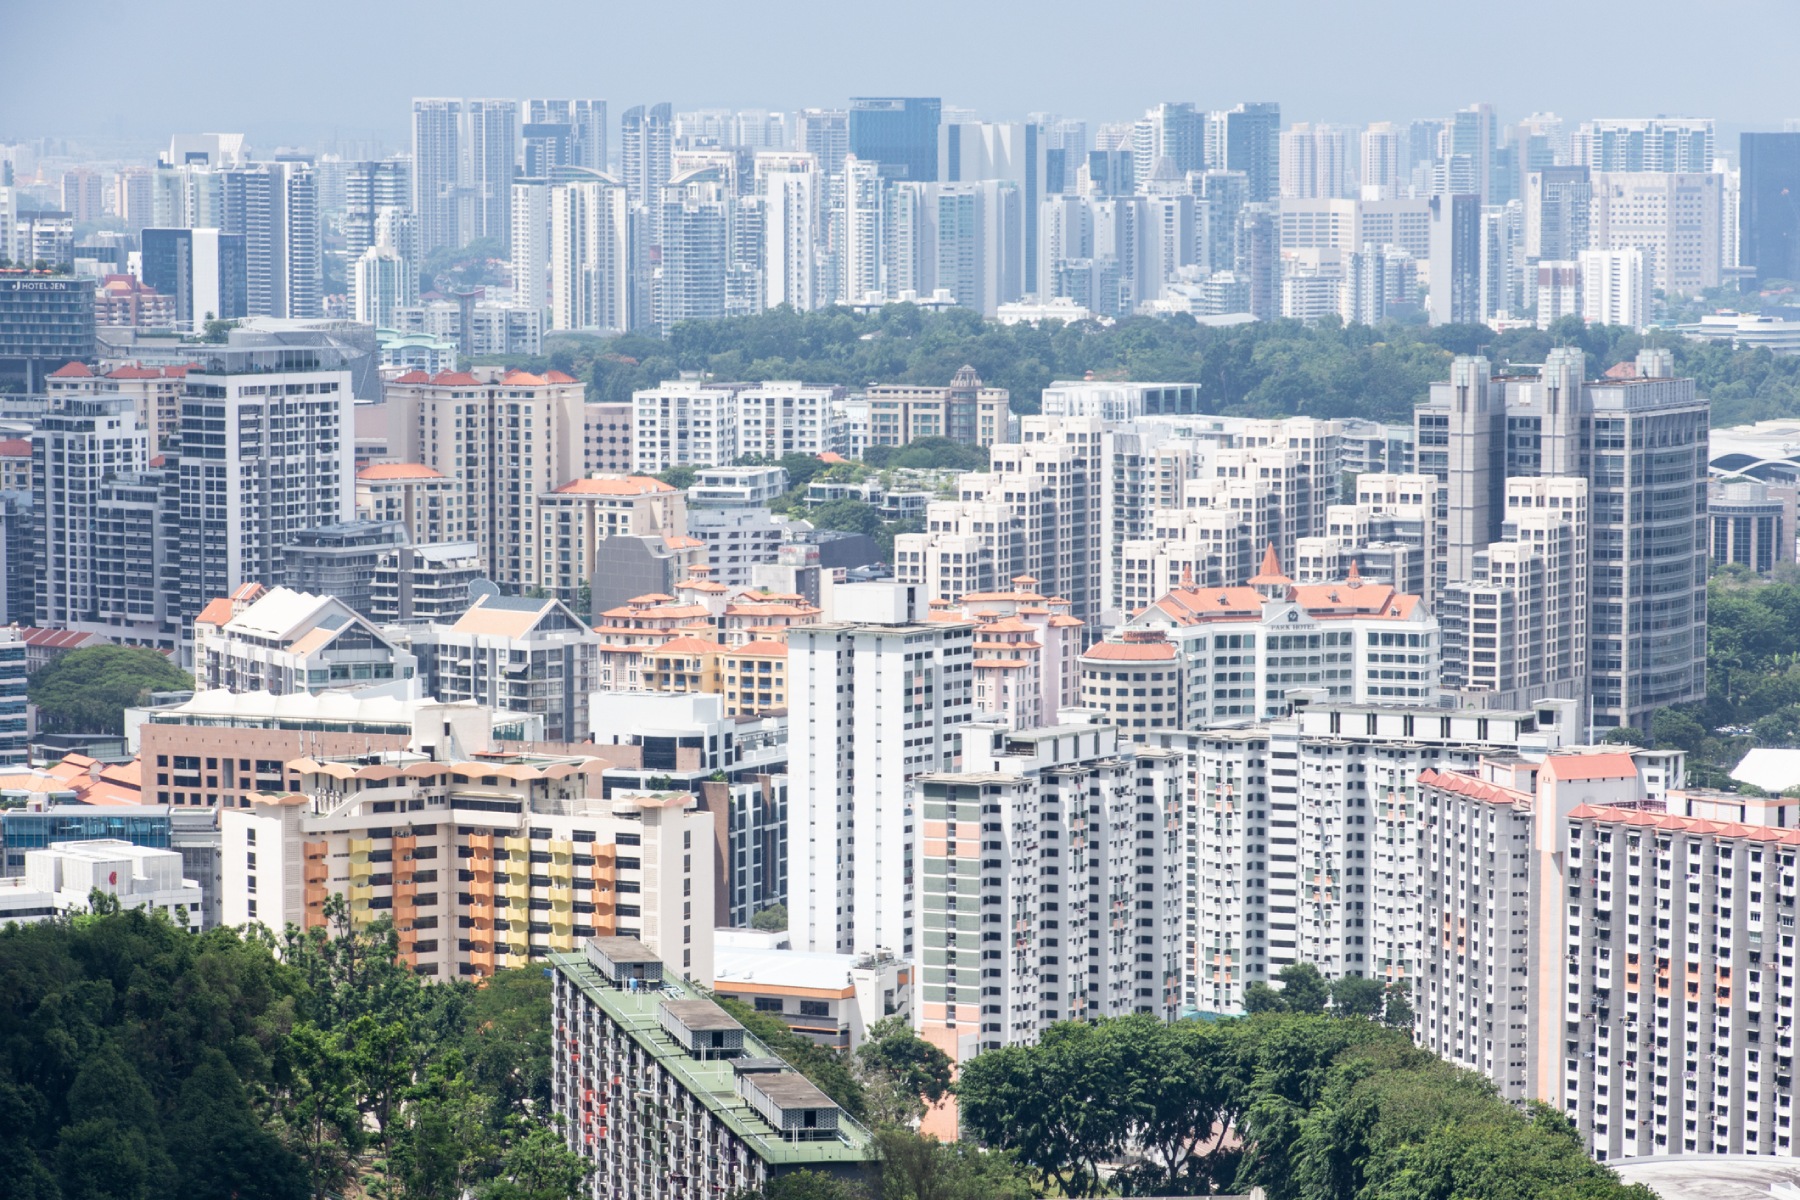 A city view showing densely clustered high-rise buildings at River Valley and Novena of Singapore city.